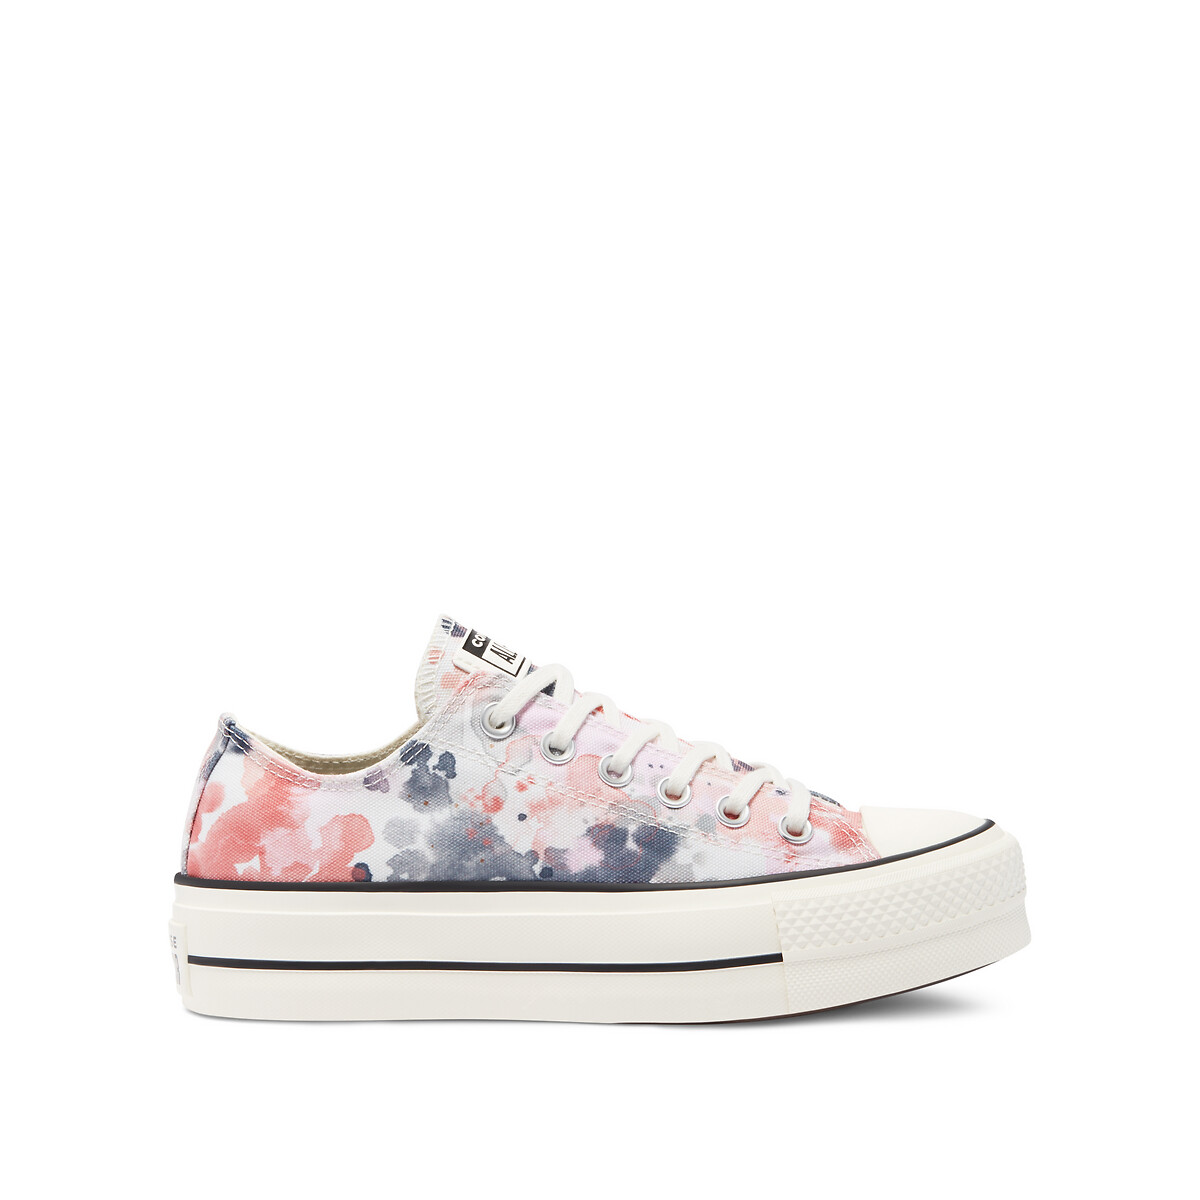 converse all star low grey pink canvas